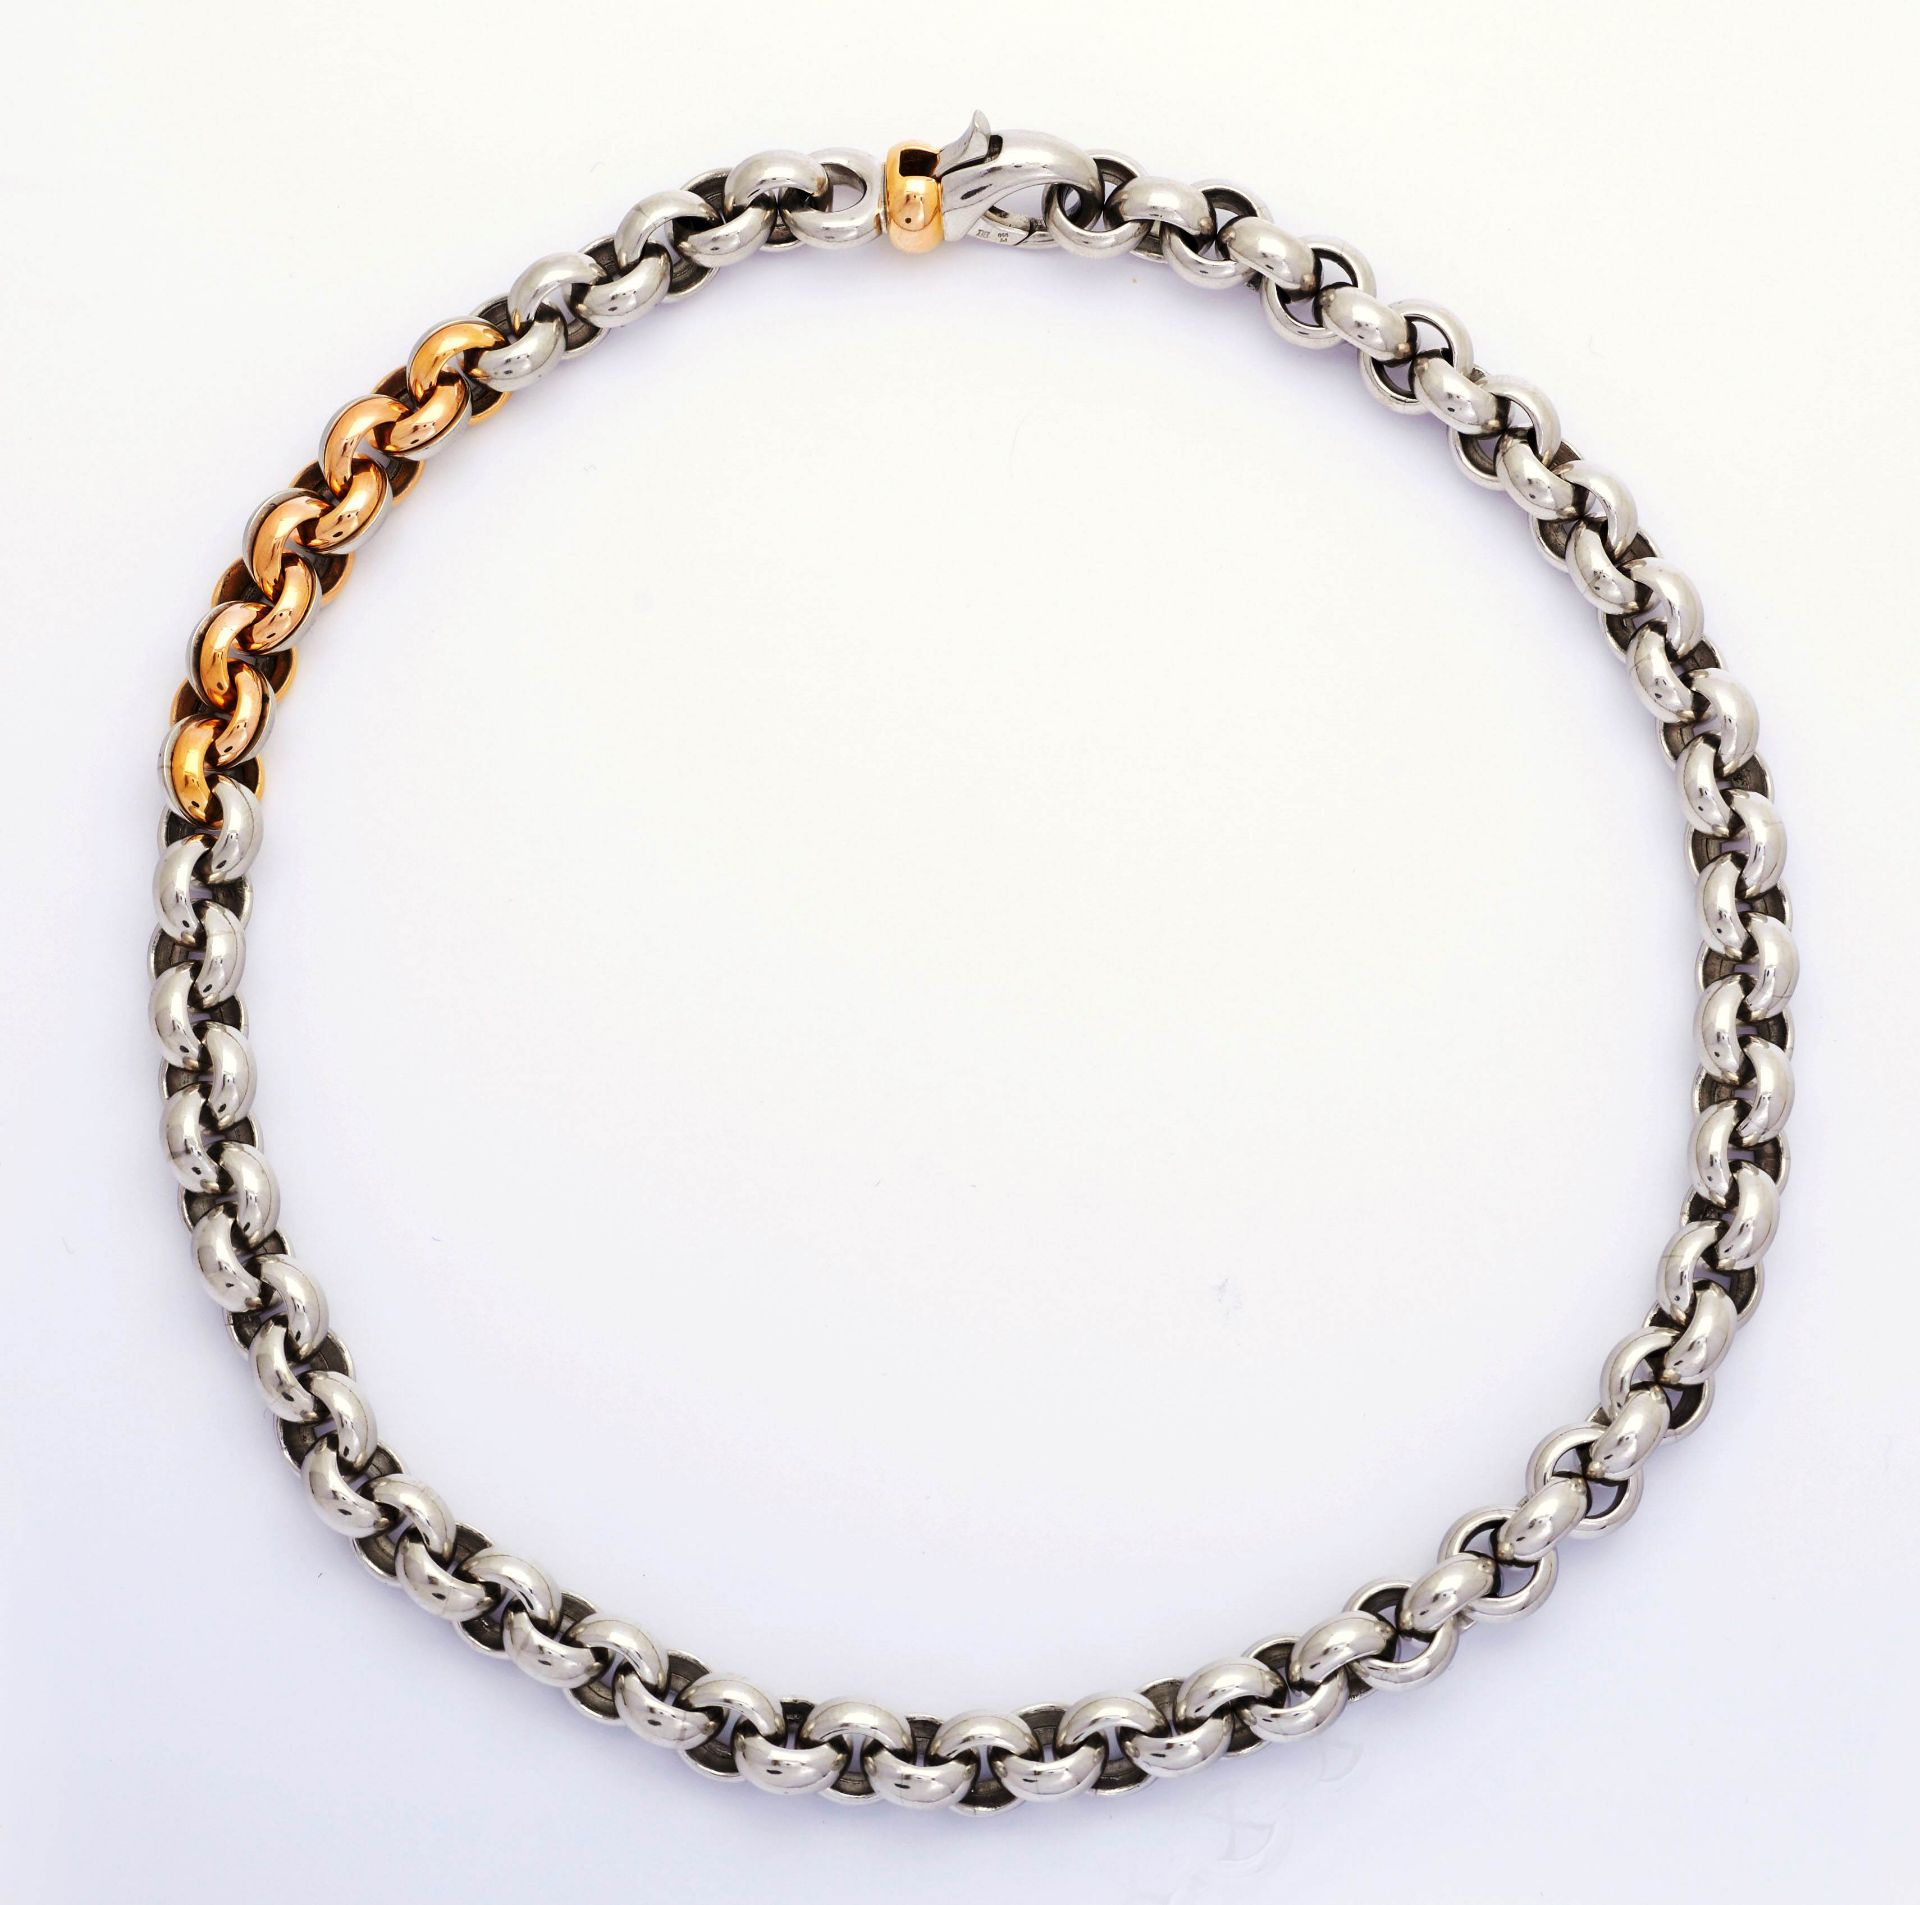 PLATINUM AND GOLD NECKLACE WITH BRACELET. - Image 3 of 4